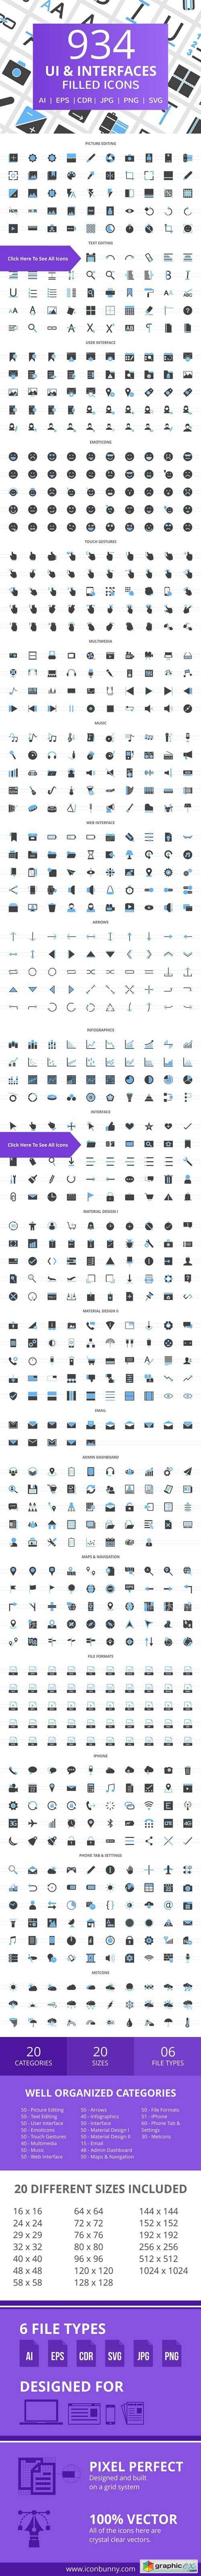 934 UI & Interfaces Filled Icons